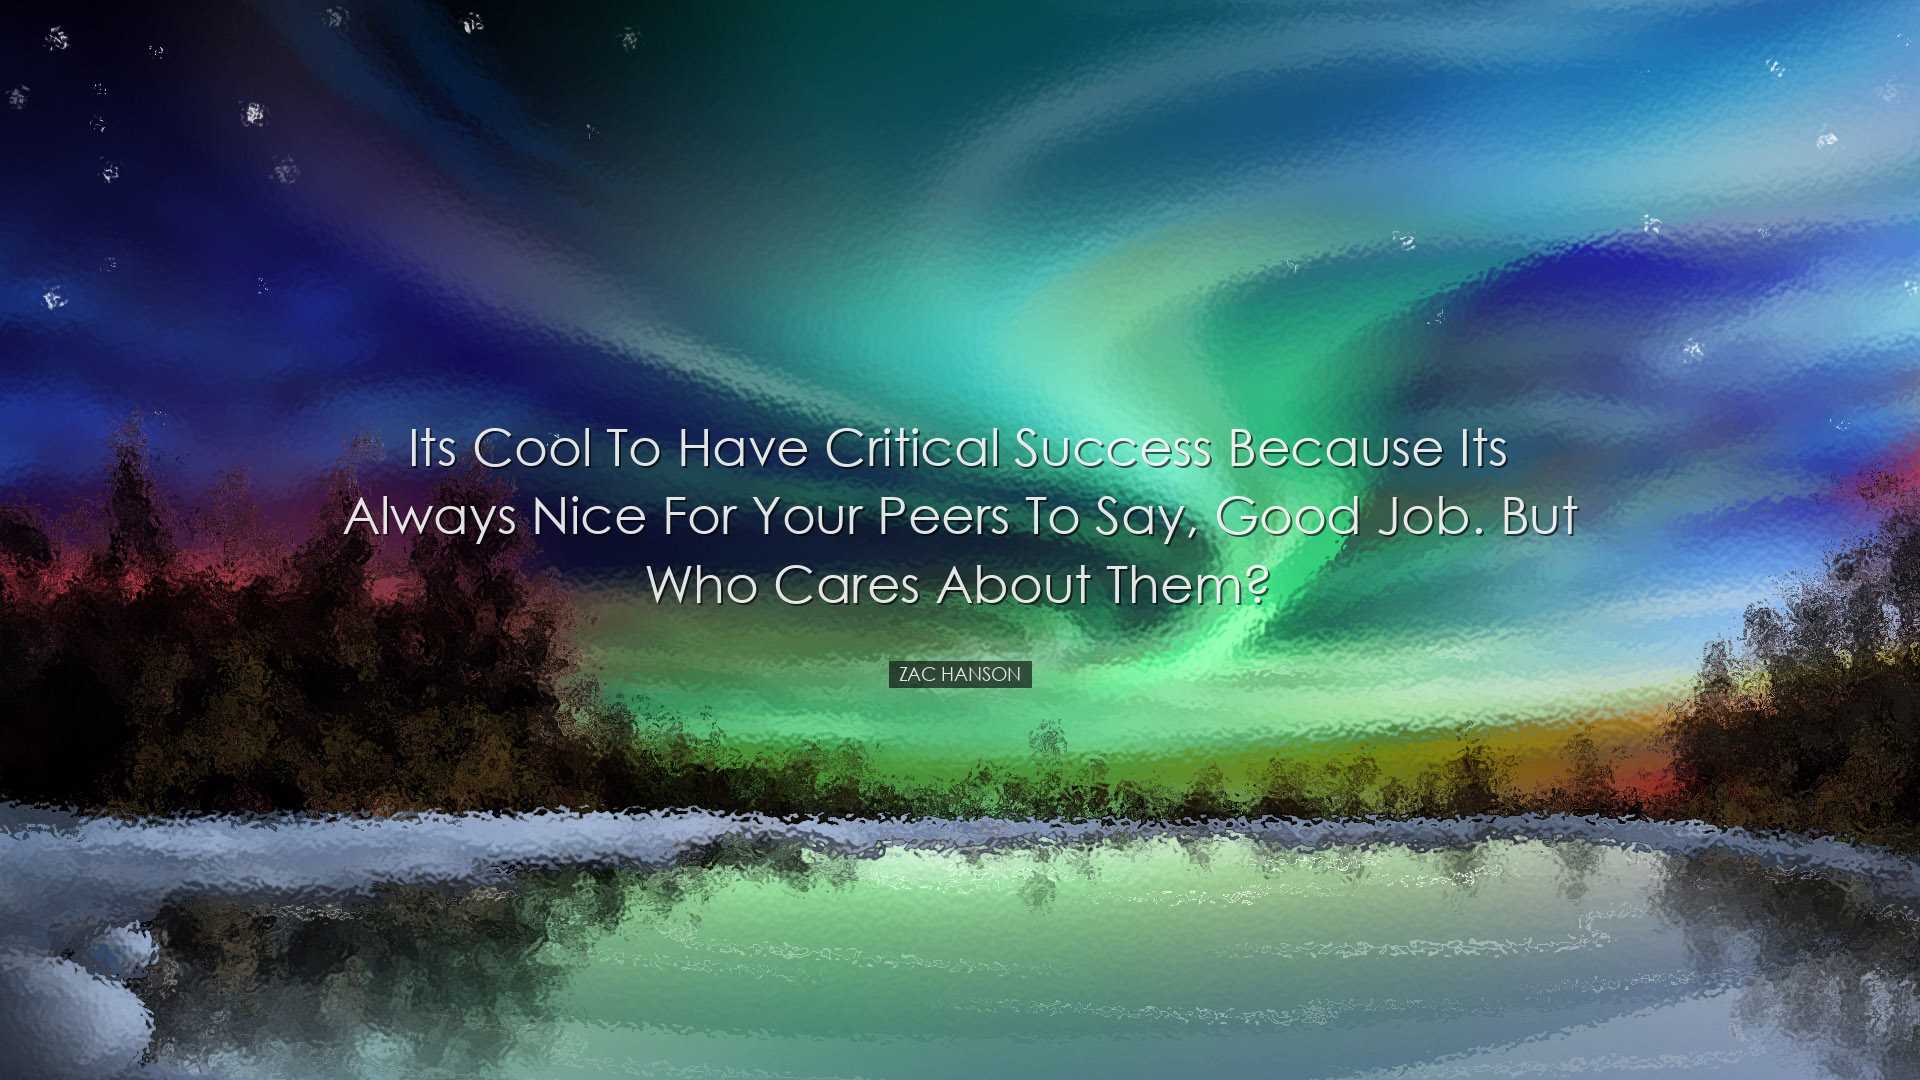 Its cool to have critical success because its always nice for your